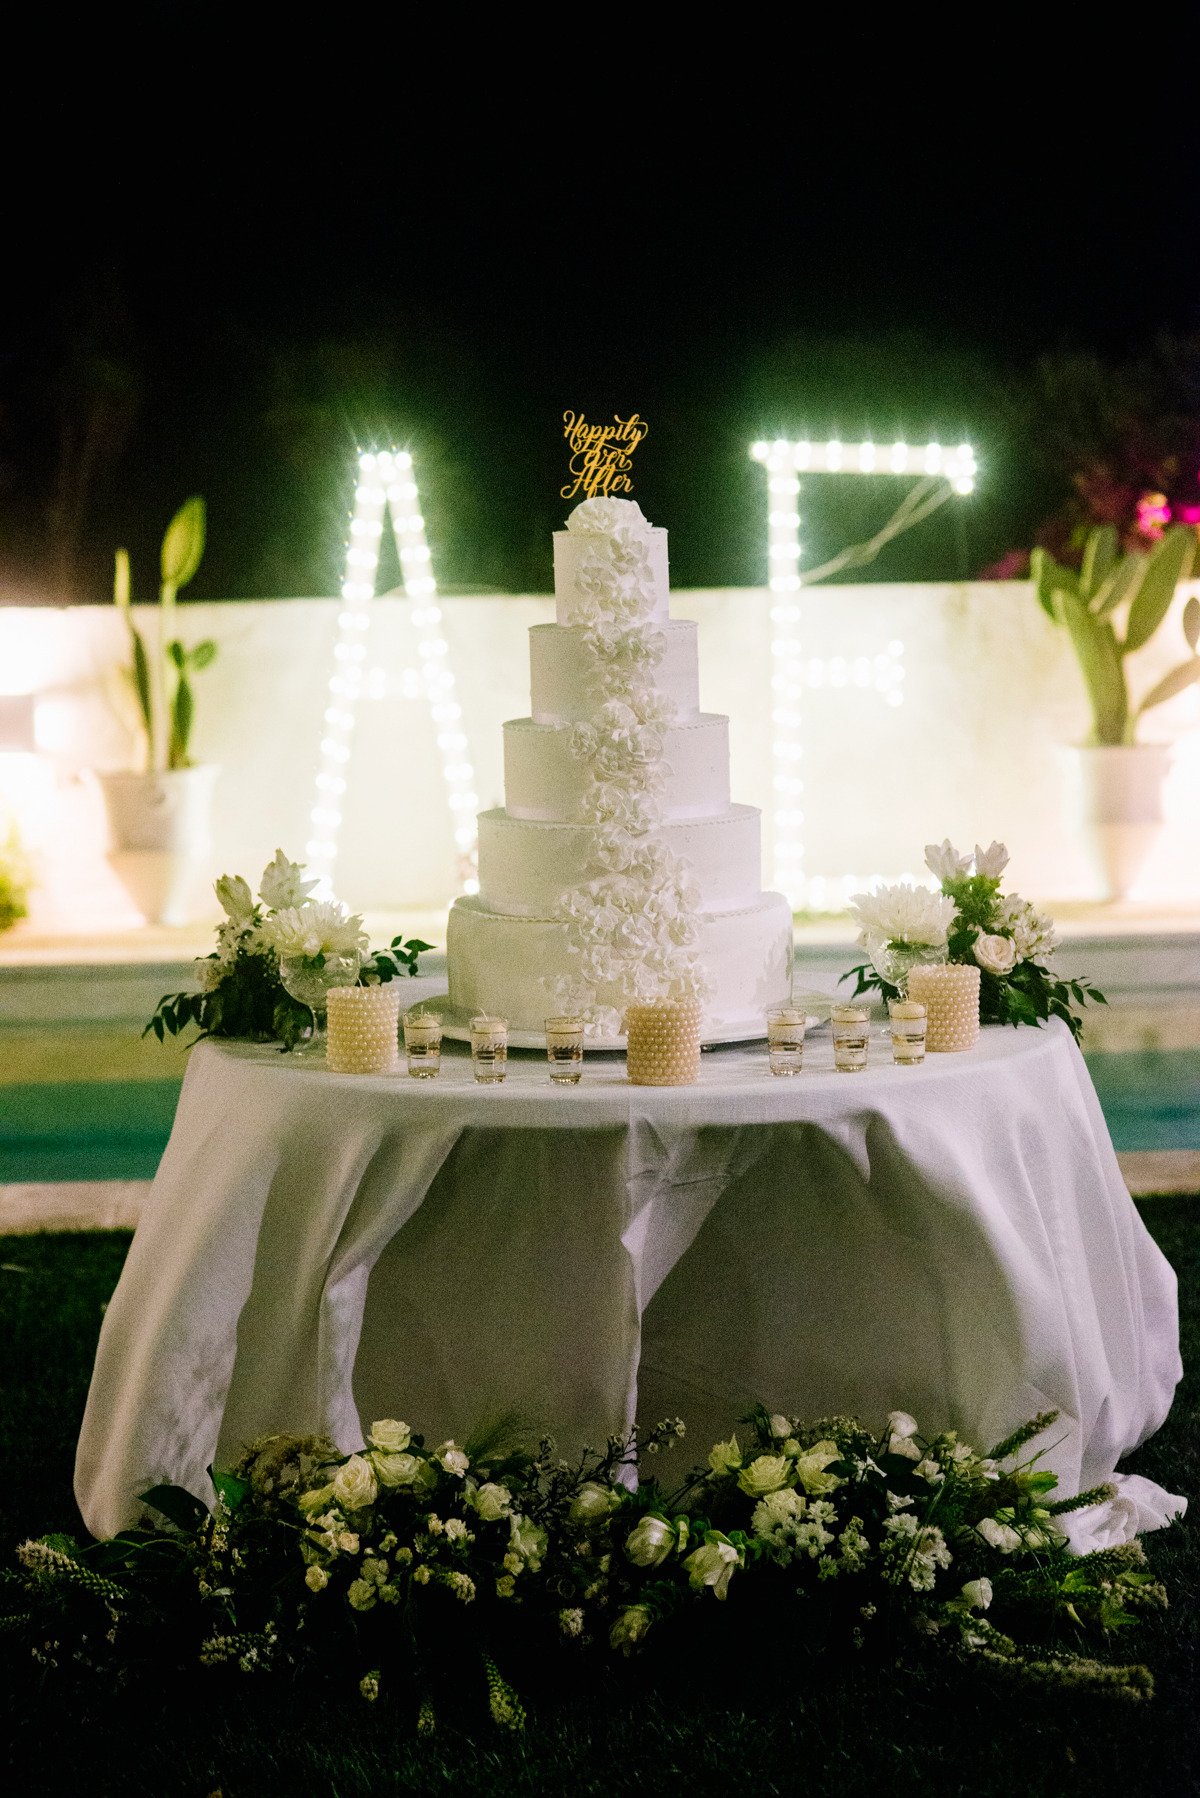 happily ever after topped wedding cake